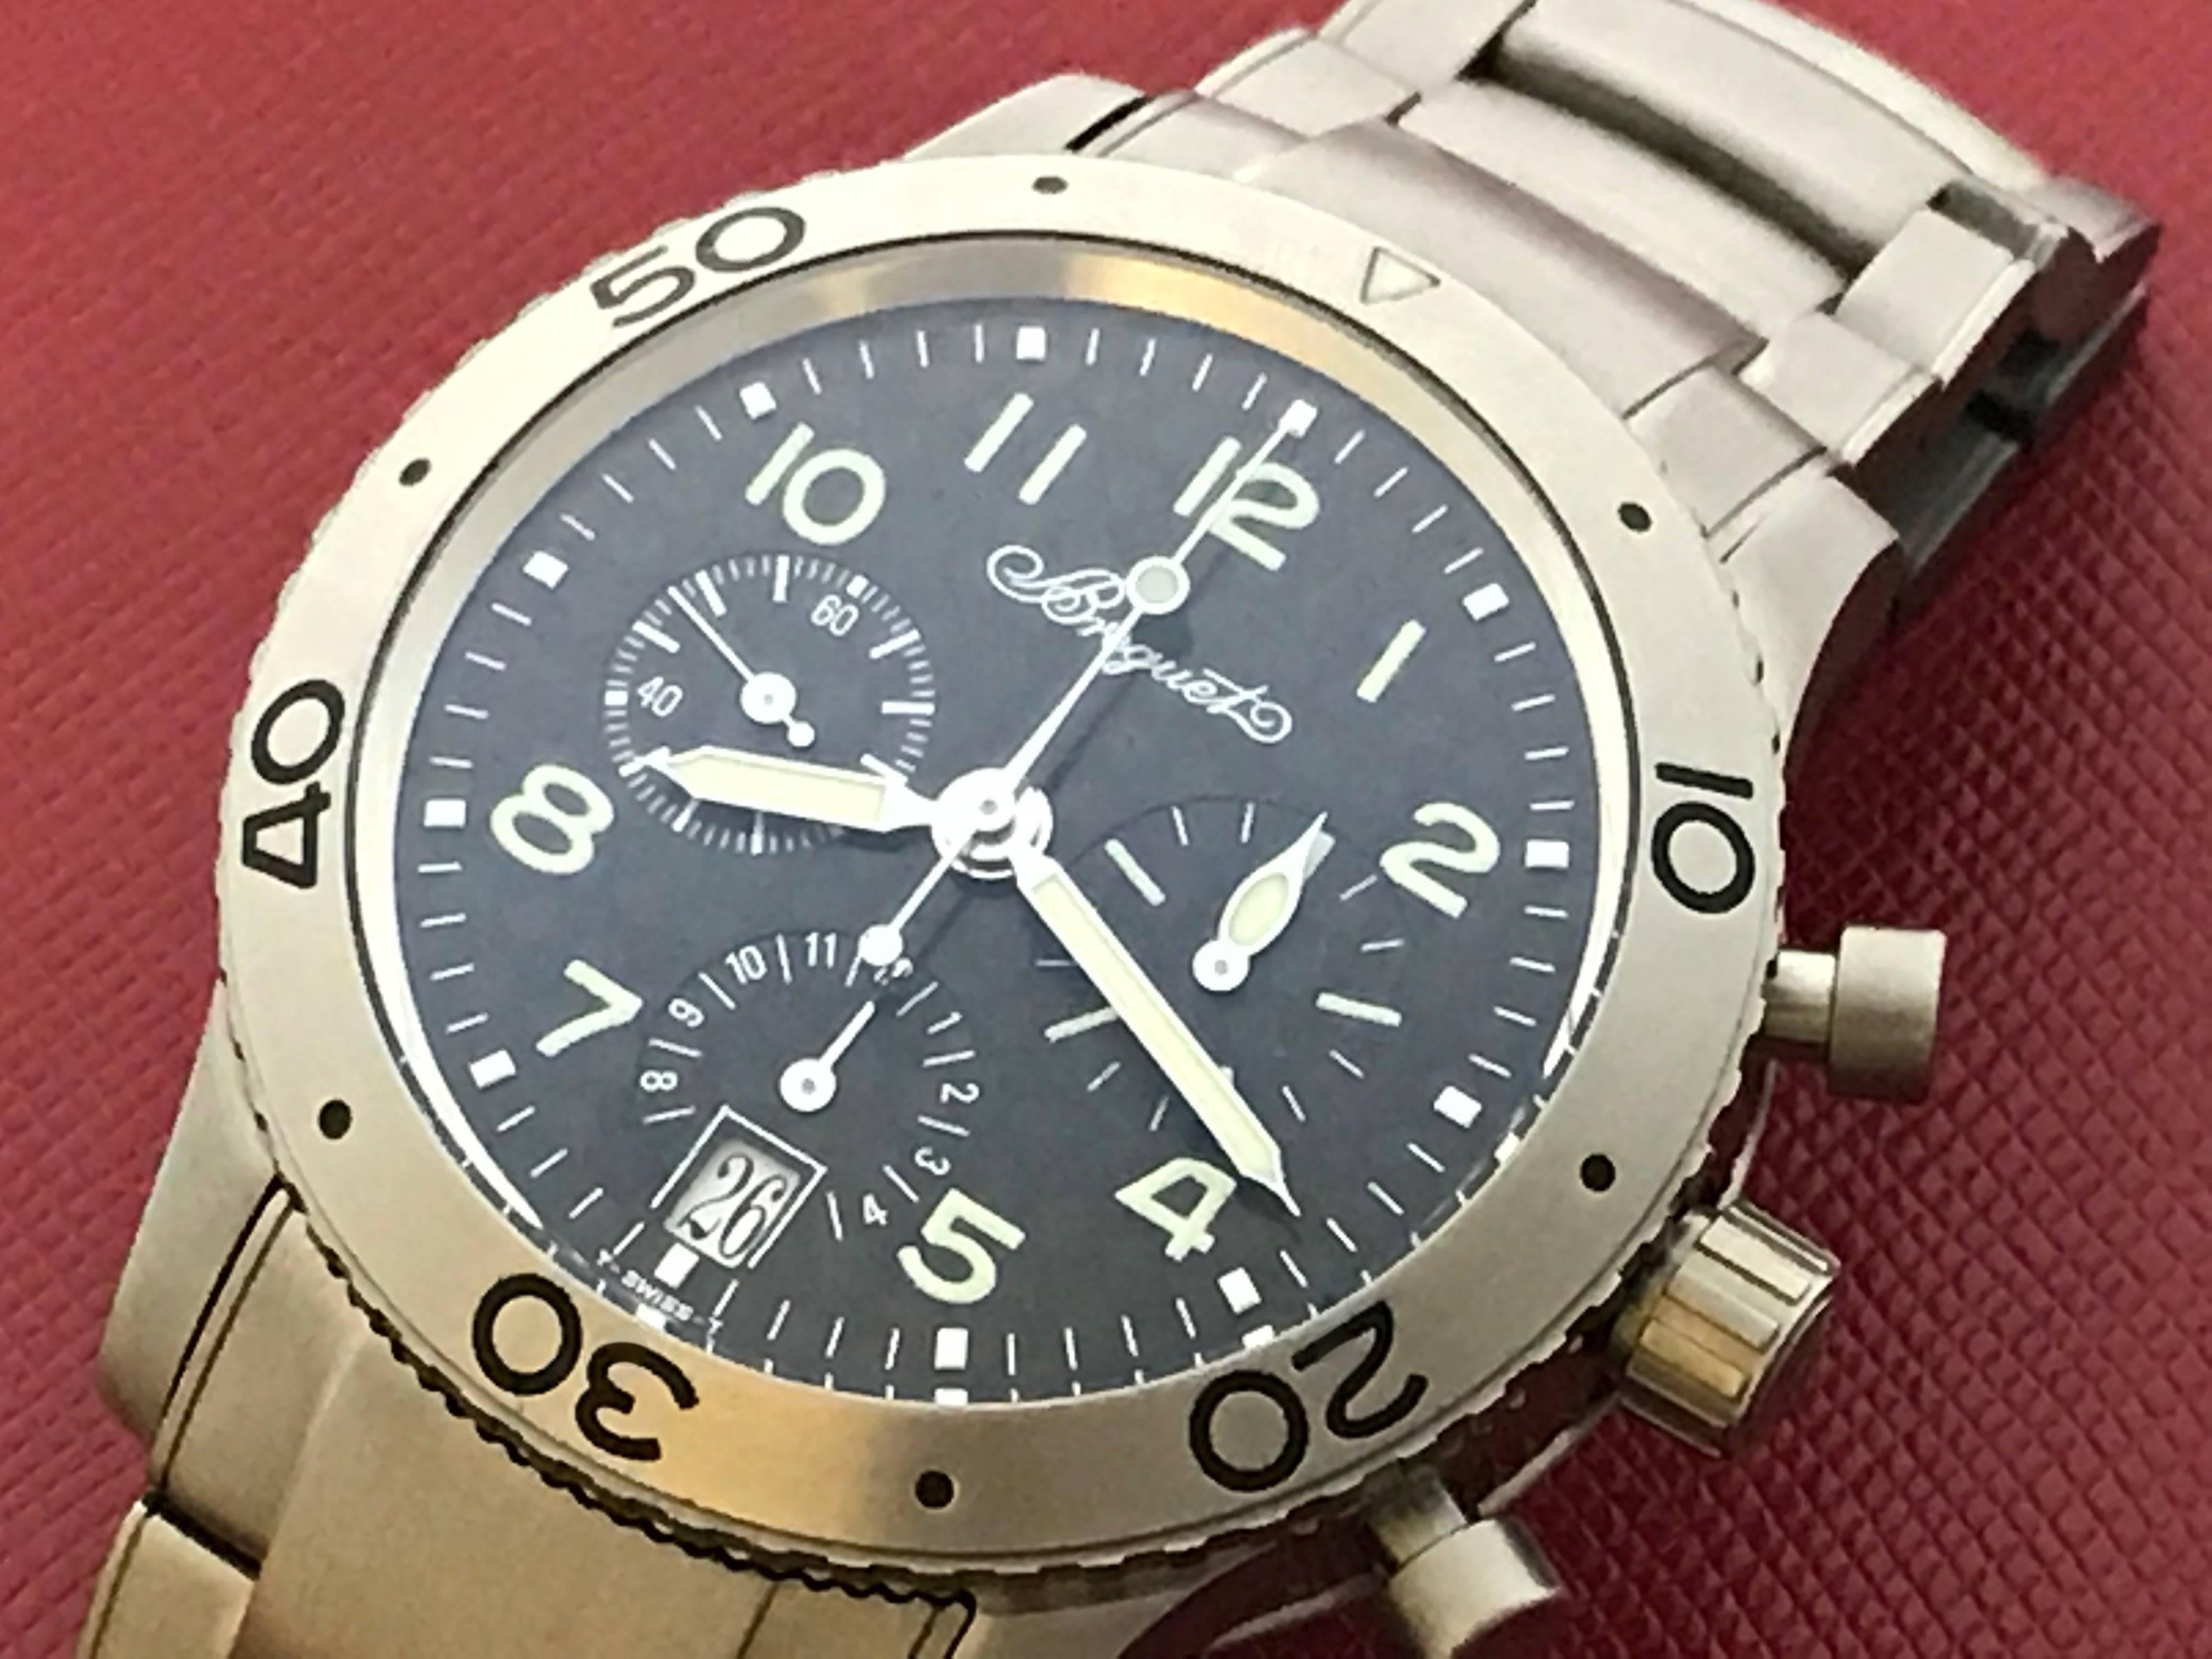 Very nice pre-owned genuine Breguet Transatlantic Chronograph Type XX Model 3820TI/K2/TW9 men's automatic stainless steel wrist watch. Charcoal black carbon fiber dial with luminous Arabic numerals, with a Titanium round waterproof style case.